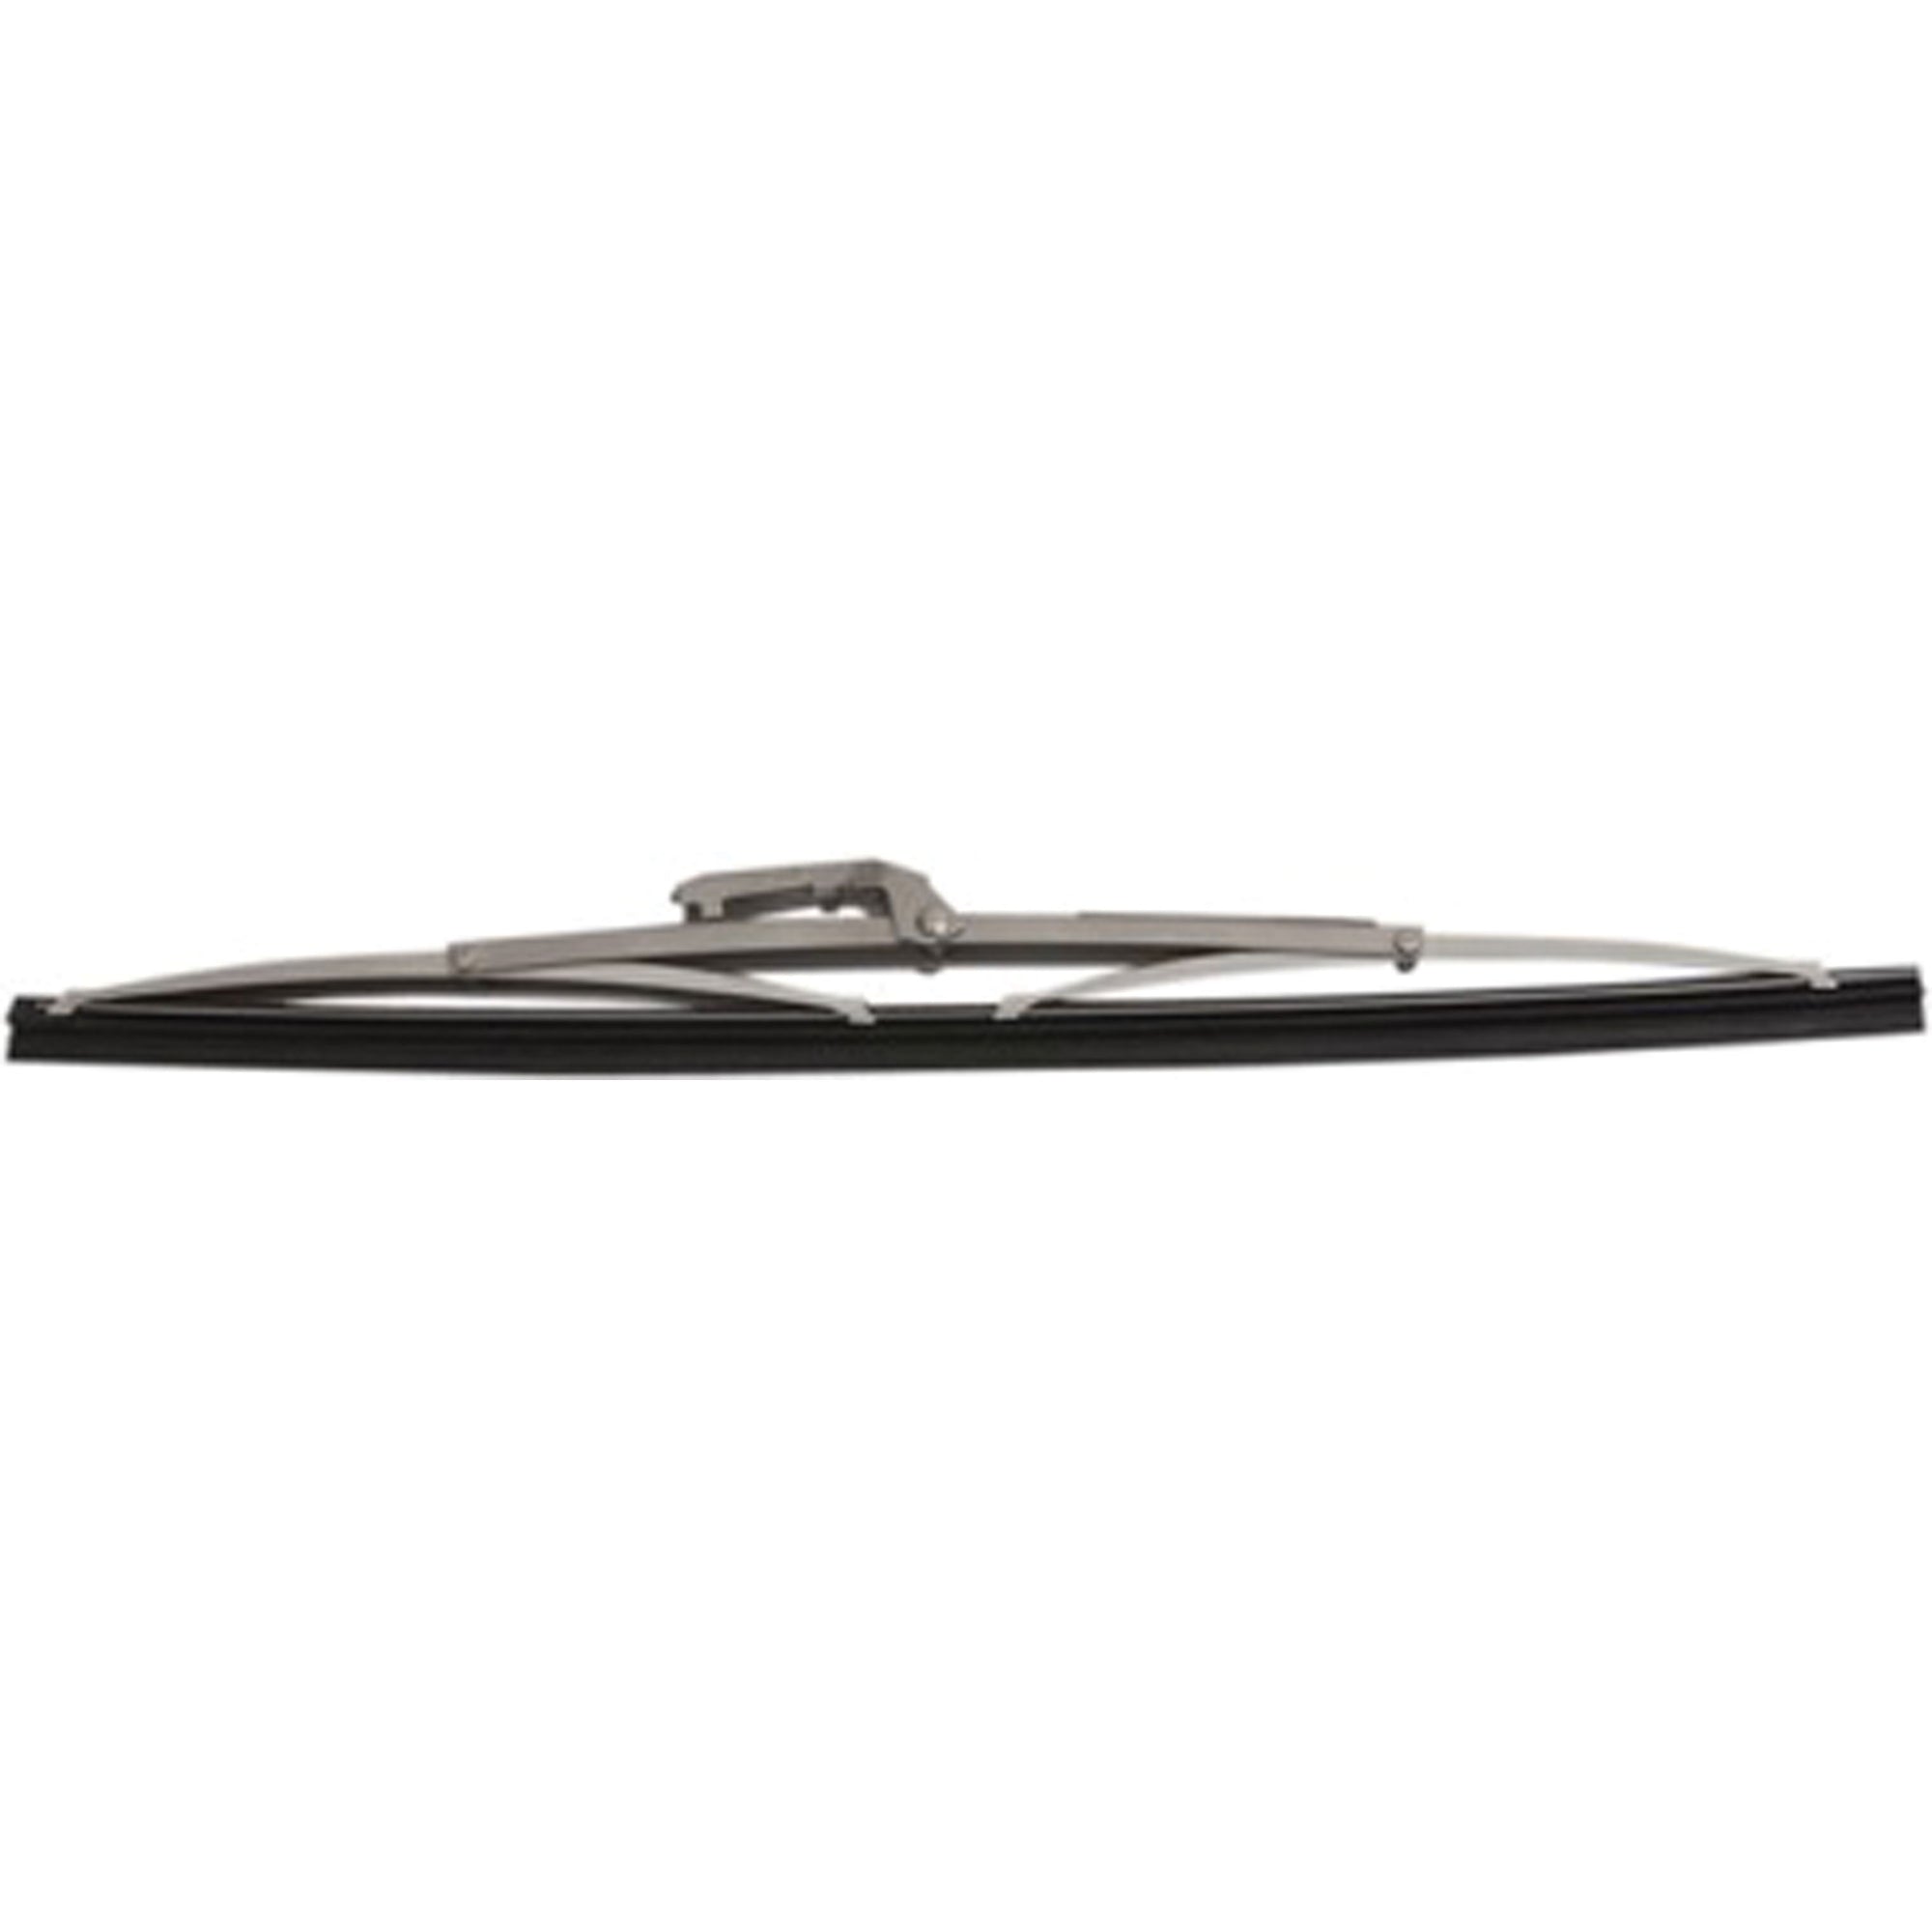 Sea-Dog 414218S-1 Stainless Steel Wiper Blade - 18", Silver